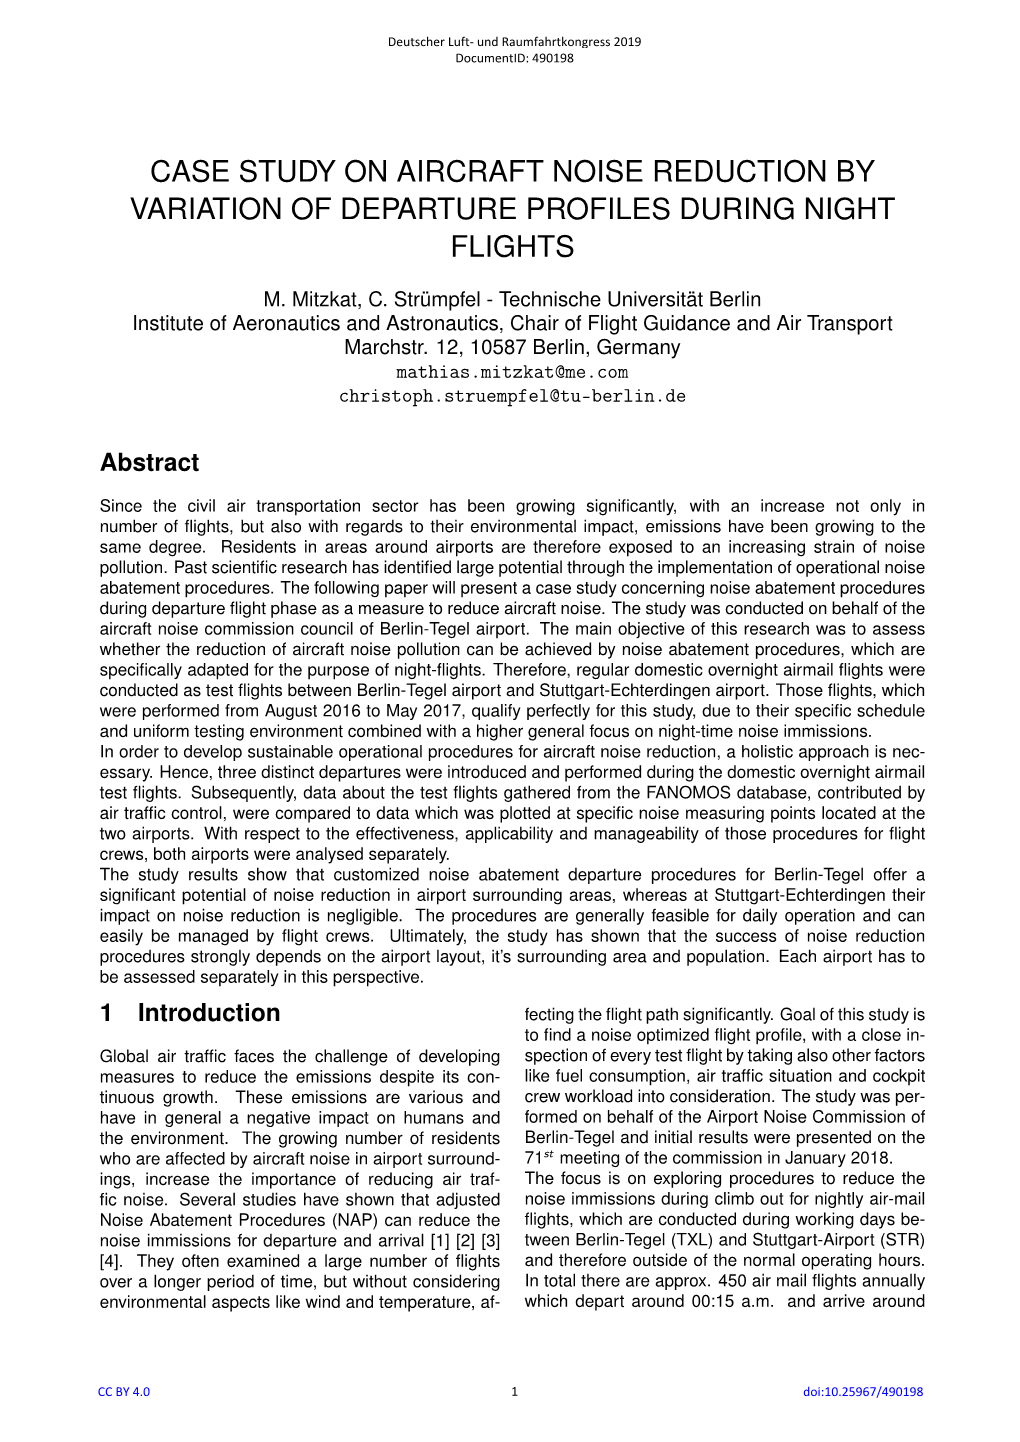 Case Study on Aircraft Noise Reduction by Variation of Departure Profiles During Night Flights